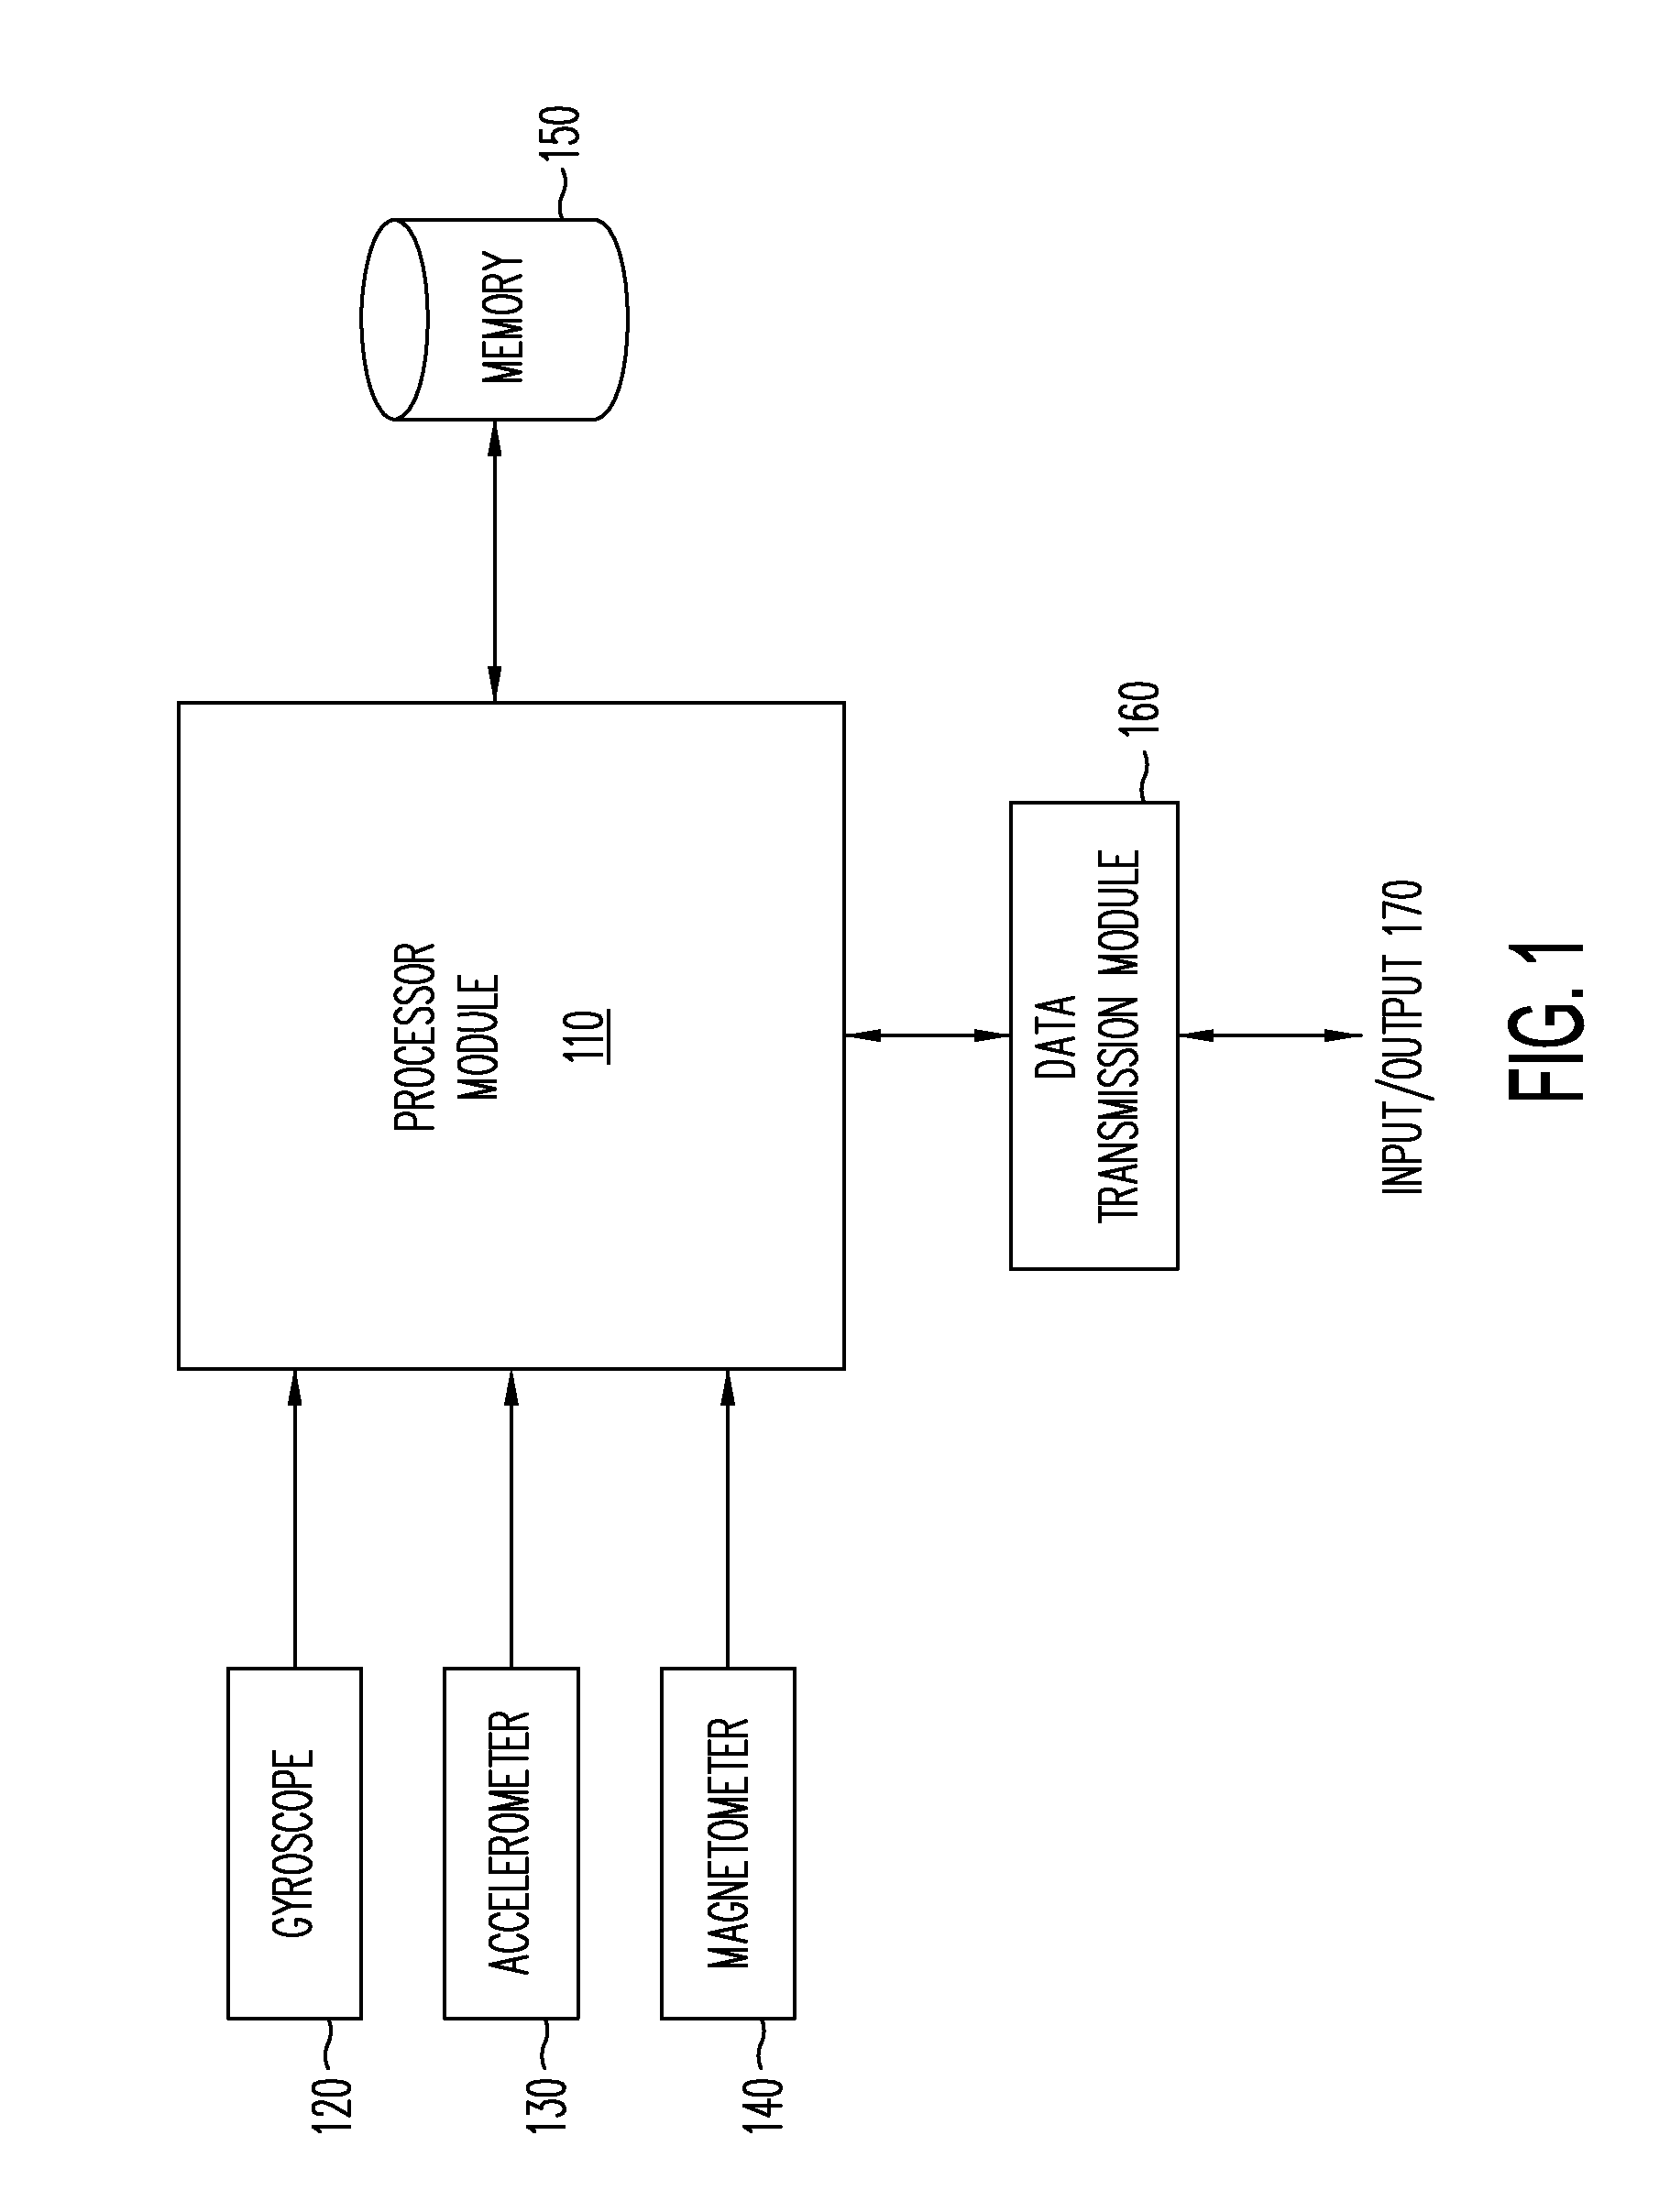 Systems and method for gyroscope calibration